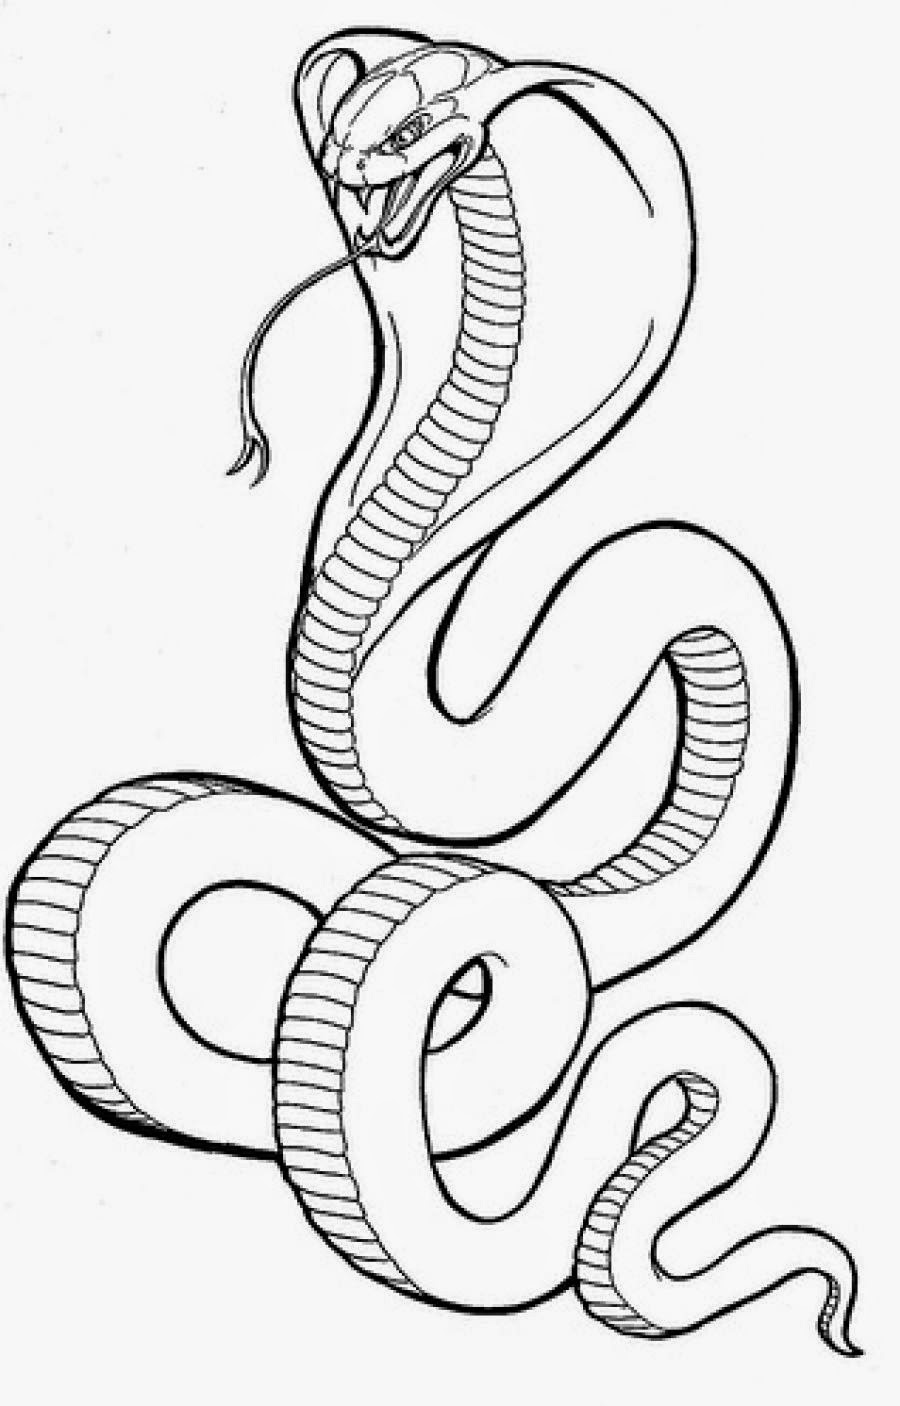 snake colouring pages free printable snake coloring pages for kids colouring snake pages 